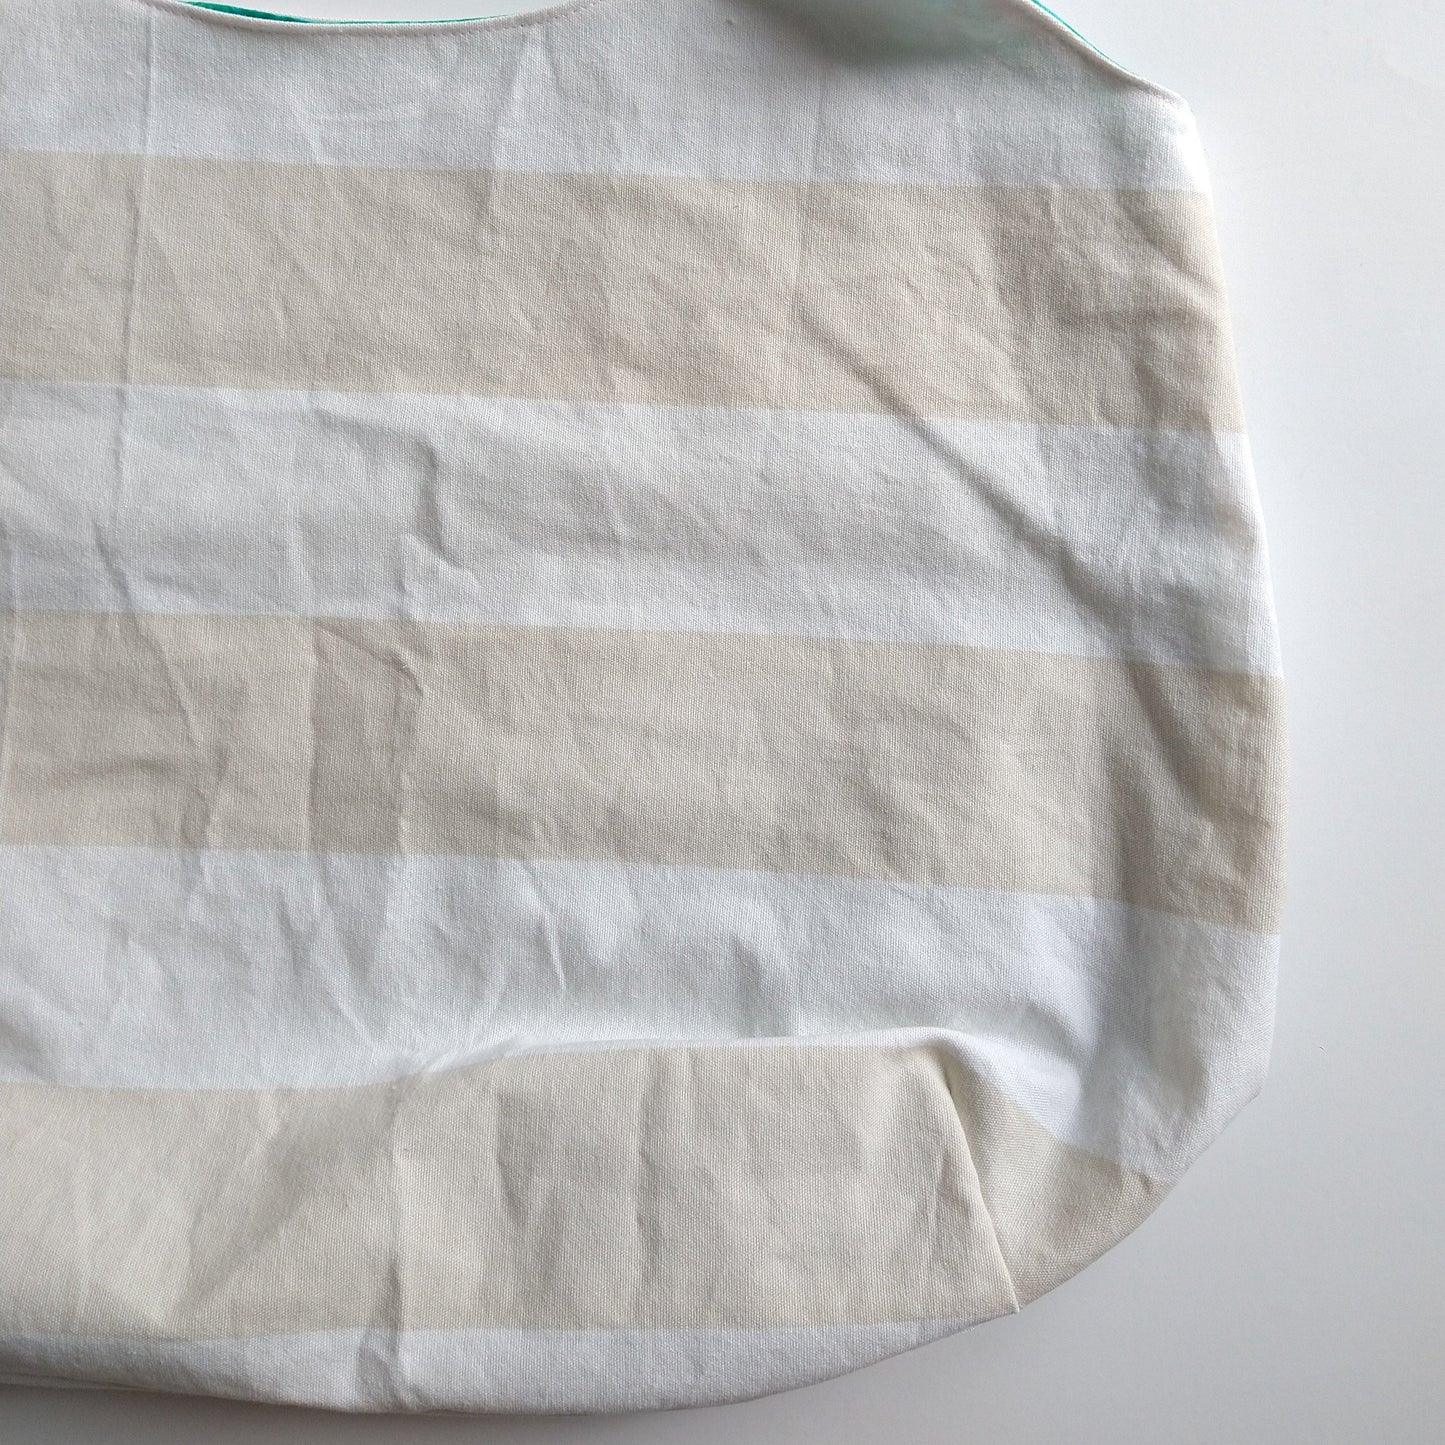 Shopping bag, reversible, size medium, natural stripes turquoise (Handmade in Canada)